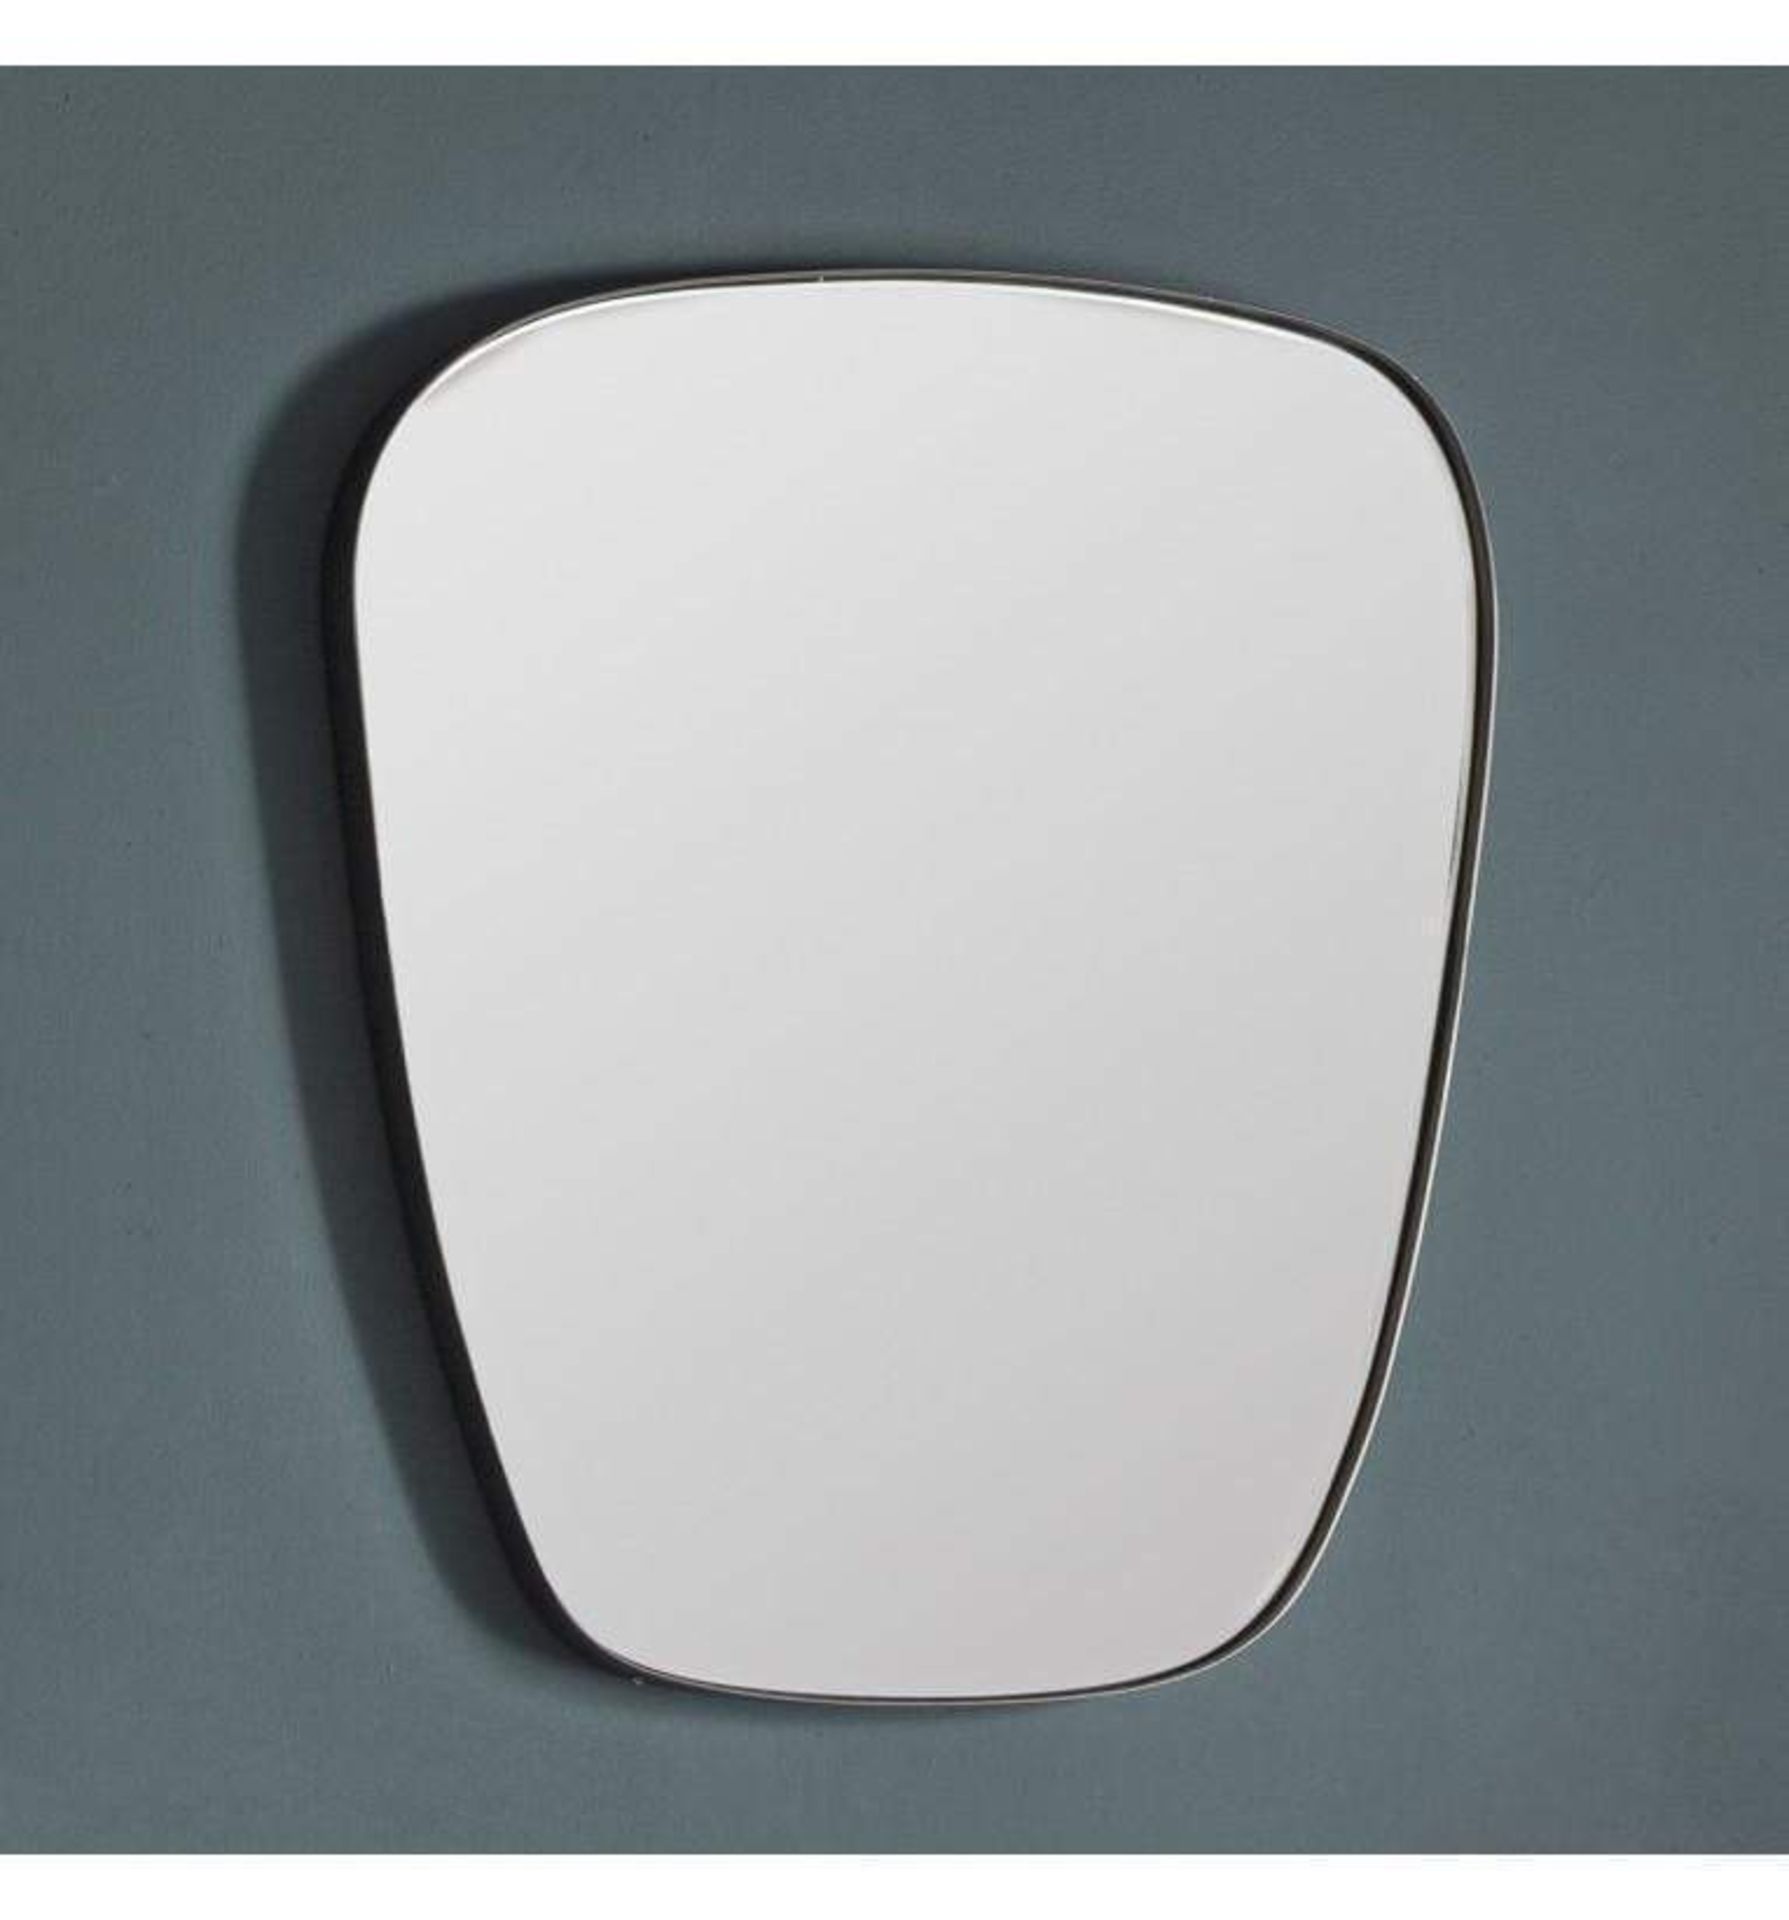 Alko Mirror Pewter With A Brushed Pewter Metal Frame, This Modern Alko Mirror Will Stand Out In